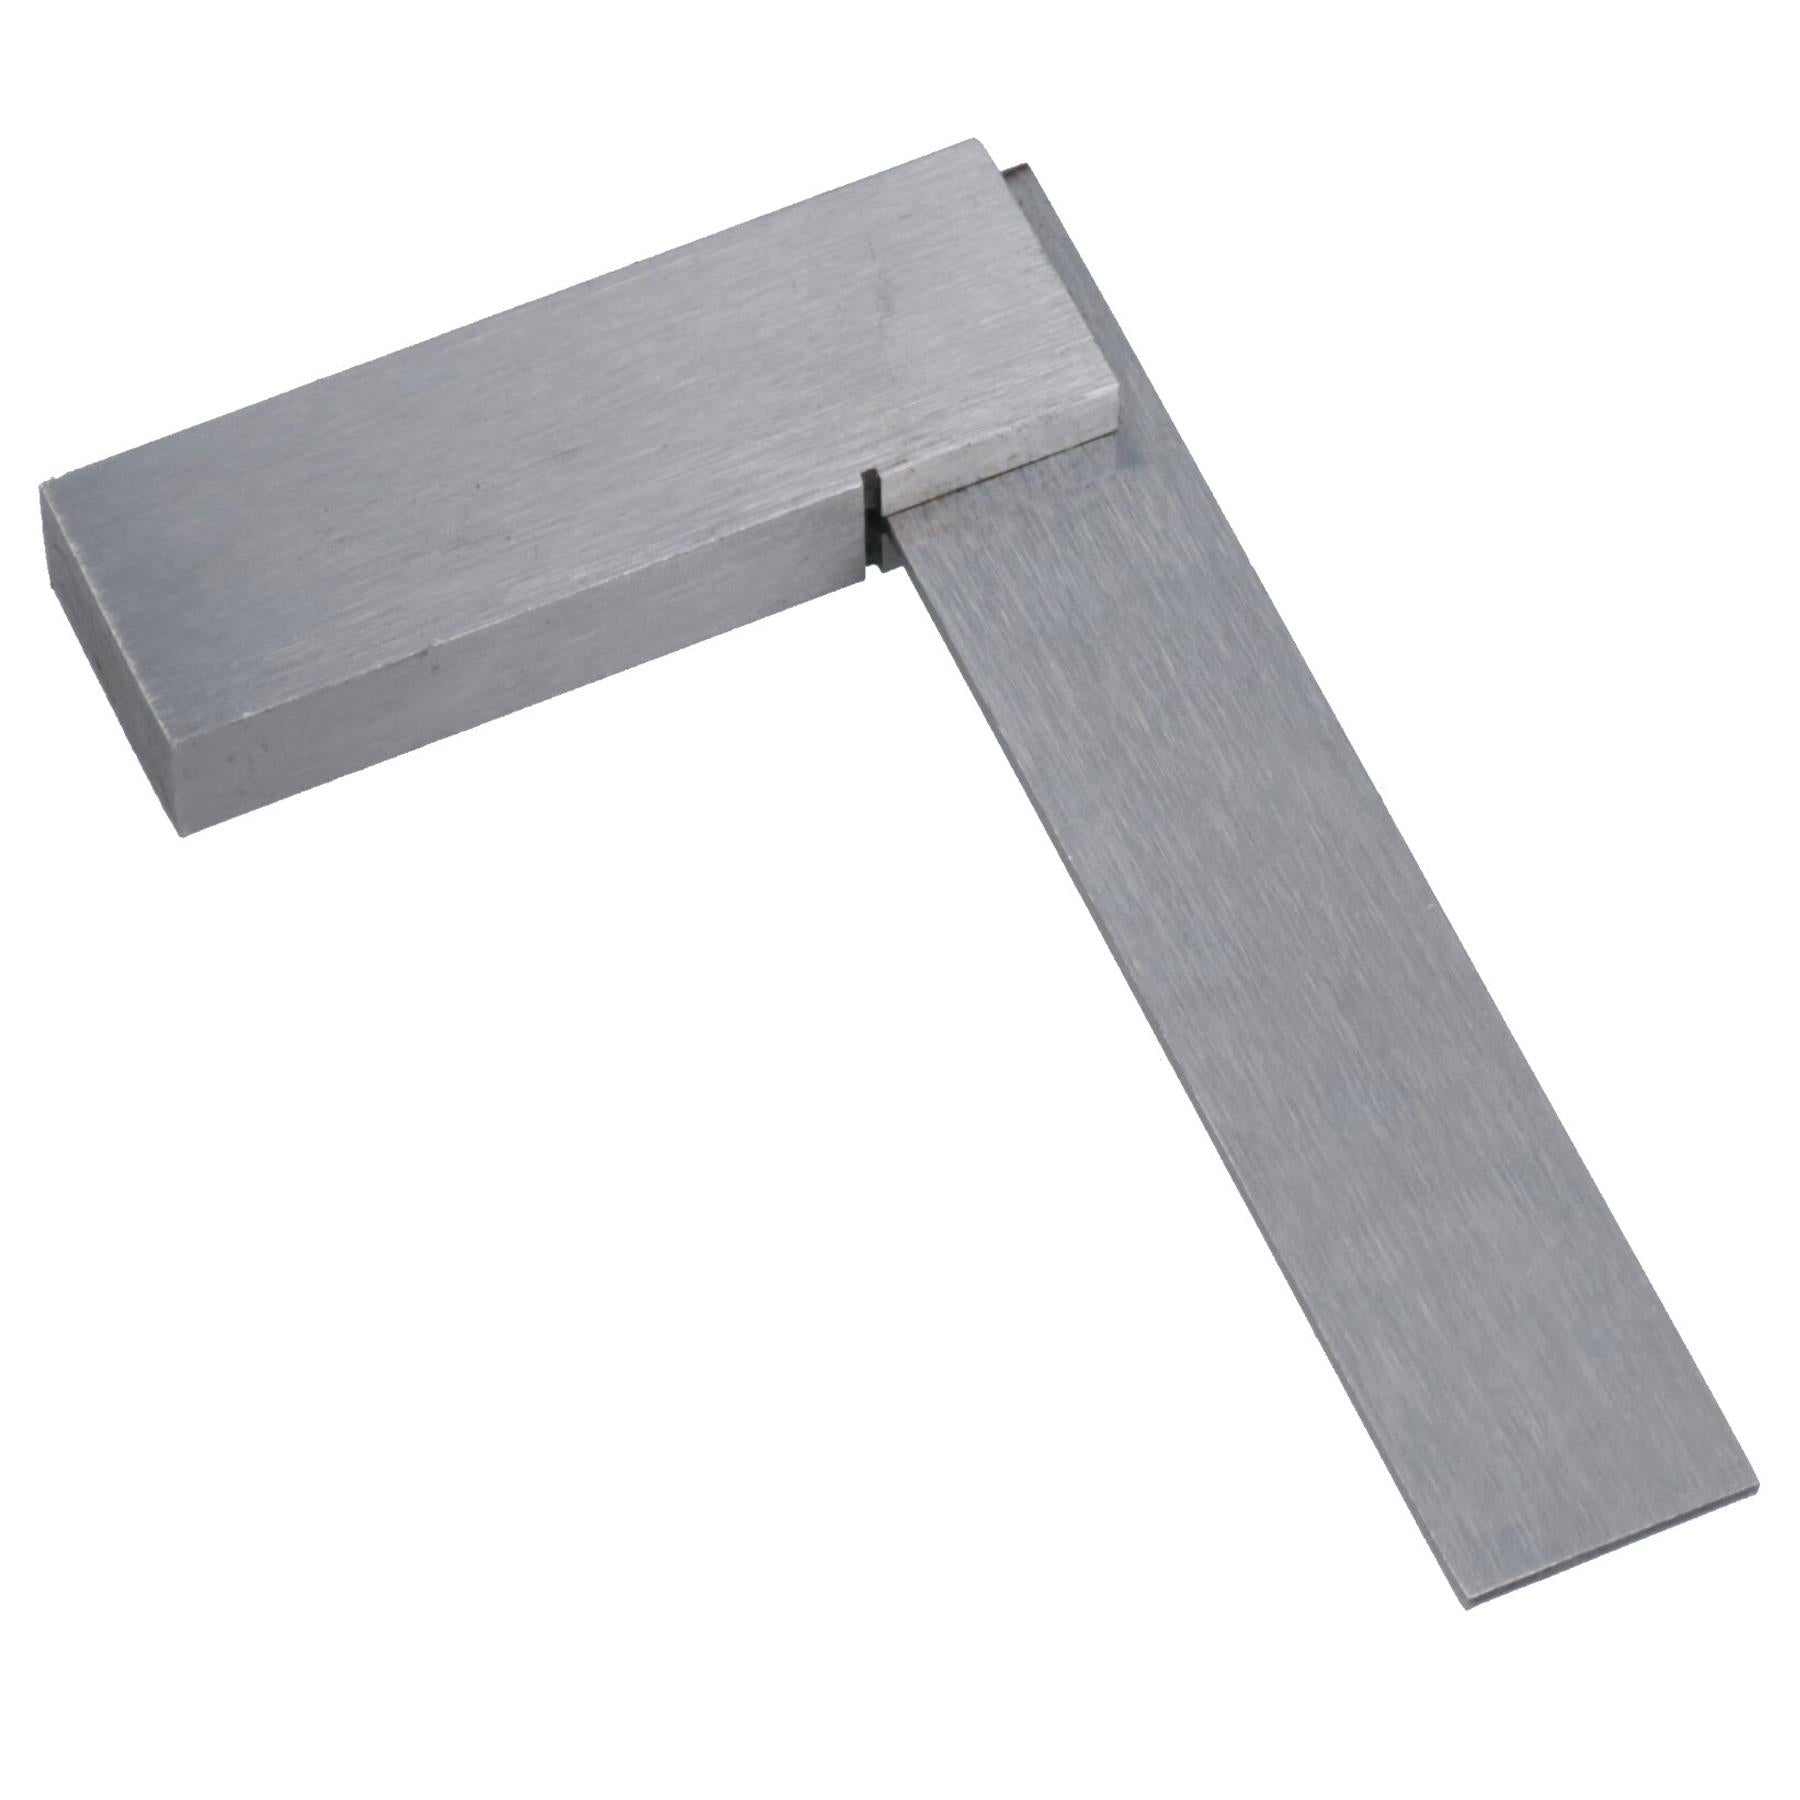 3” 75mm Engineer Tri Set Square Right Angle Straight Edge Stainless Steel